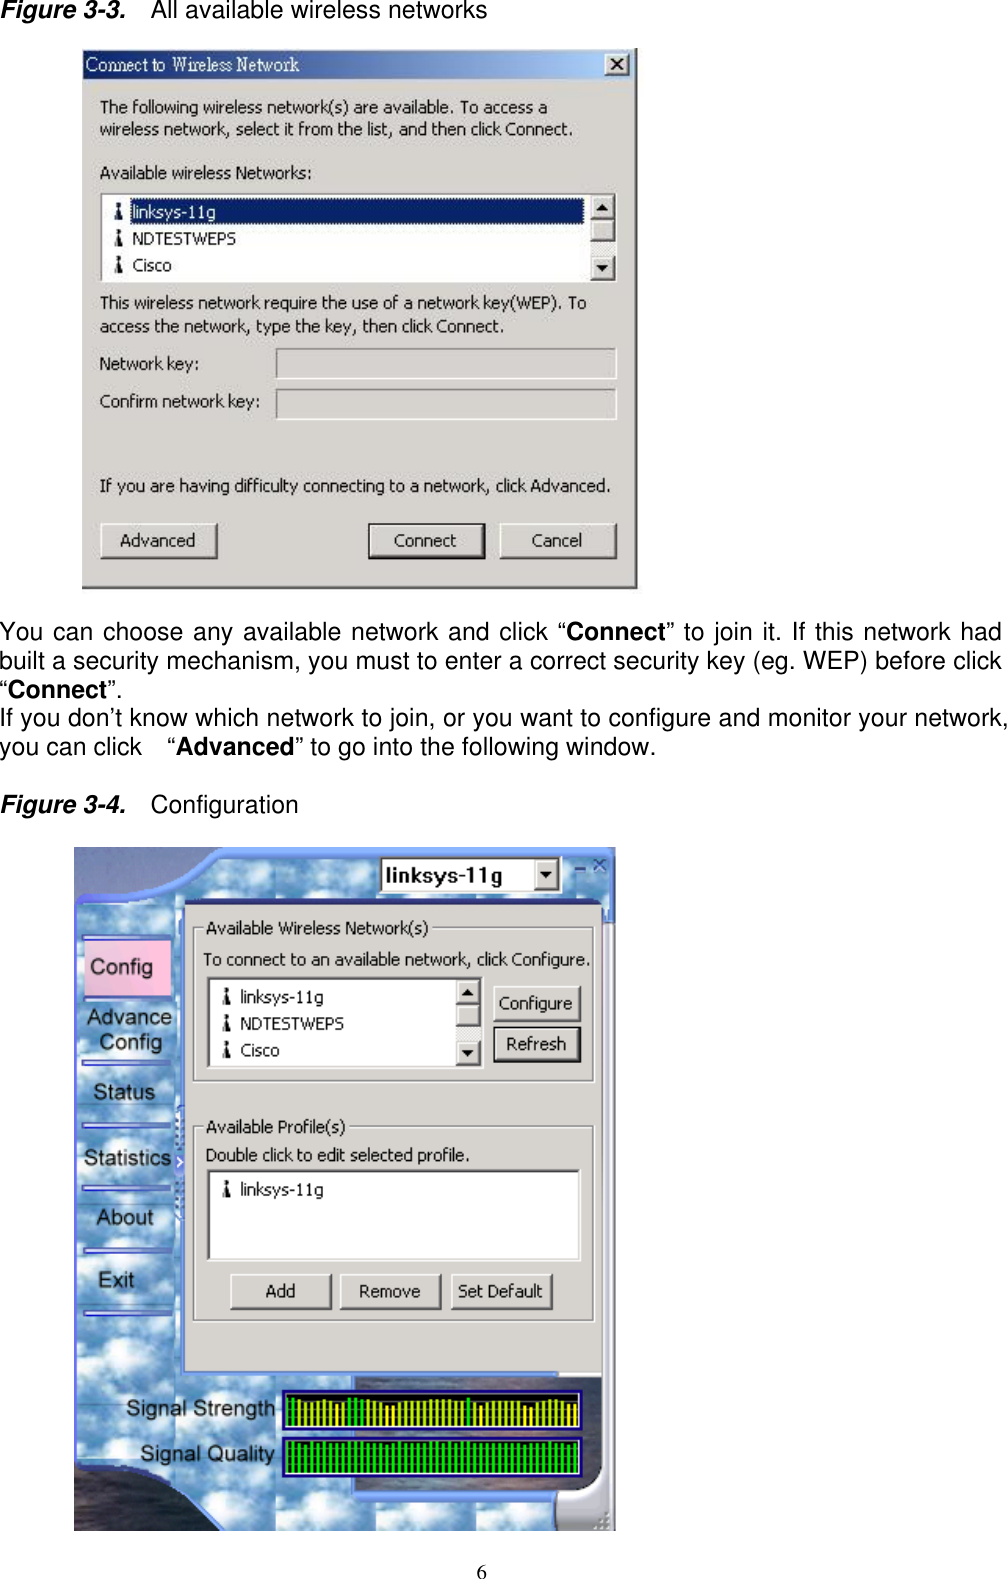 6   Figure 3-3.    All available wireless networks    You can choose any available network and click “Connect” to join it. If this network had built a security mechanism, you must to enter a correct security key (eg. WEP) before click   “Connect”. If you don’t know which network to join, or you want to configure and monitor your network, you can click    “Advanced” to go into the following window.  Figure 3-4.    Configuration   